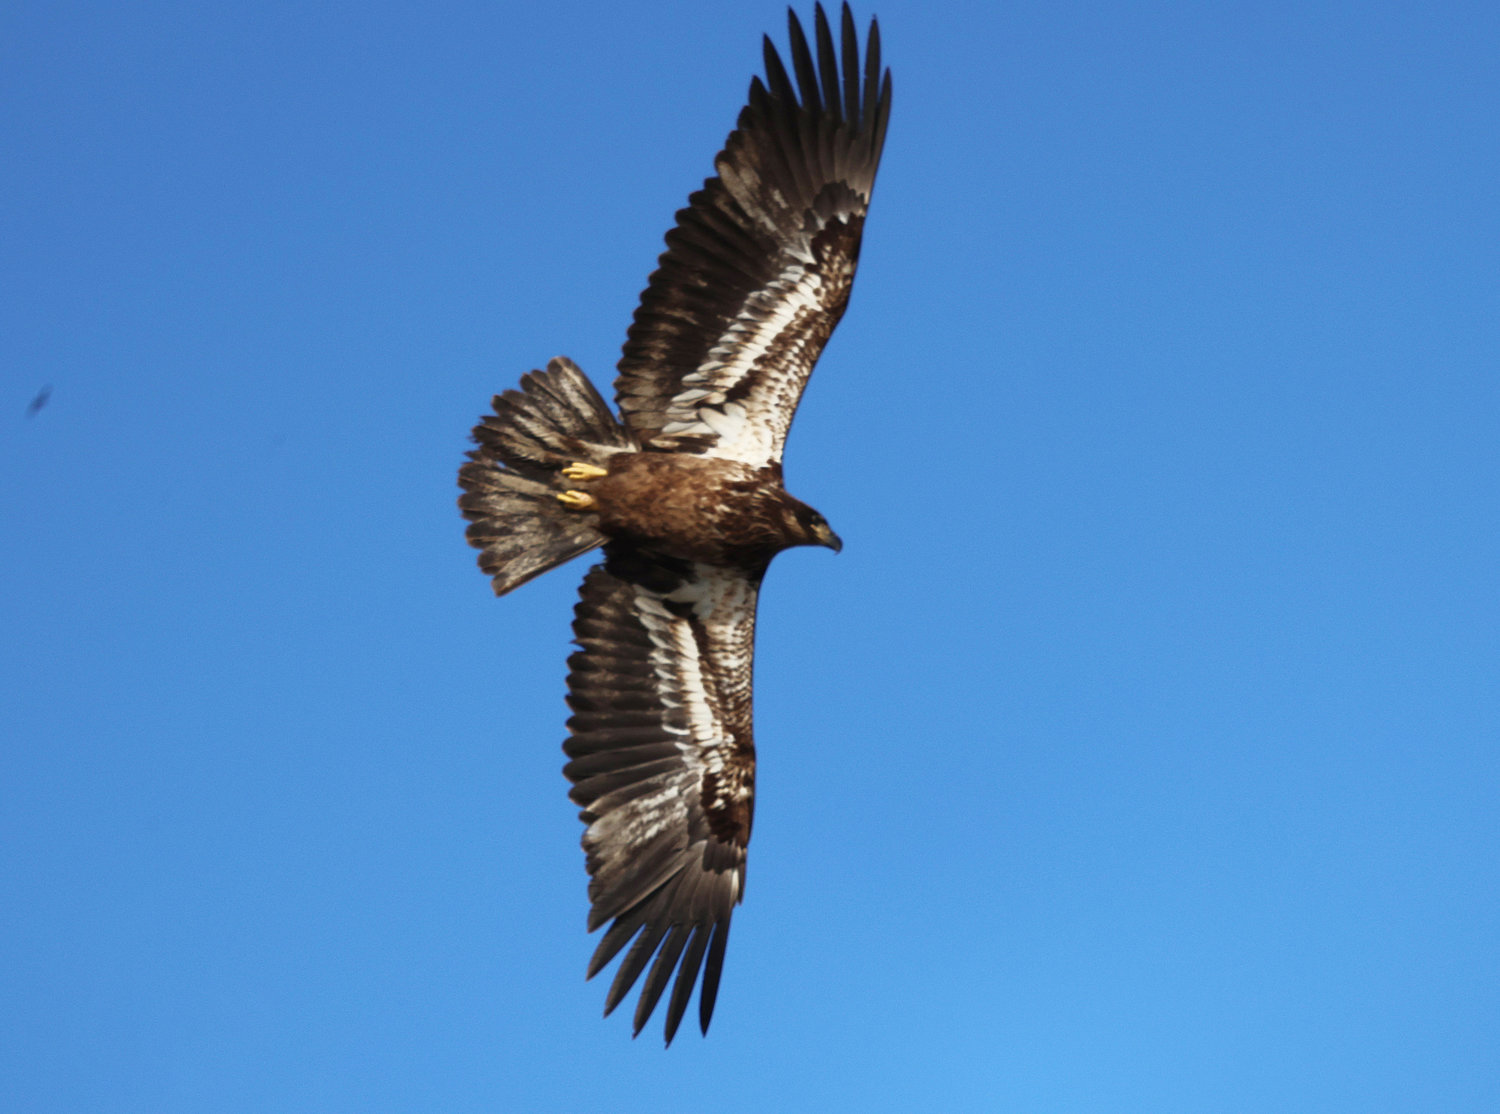 This young Bald Eagle was seen over Quidnet last Wednesday.